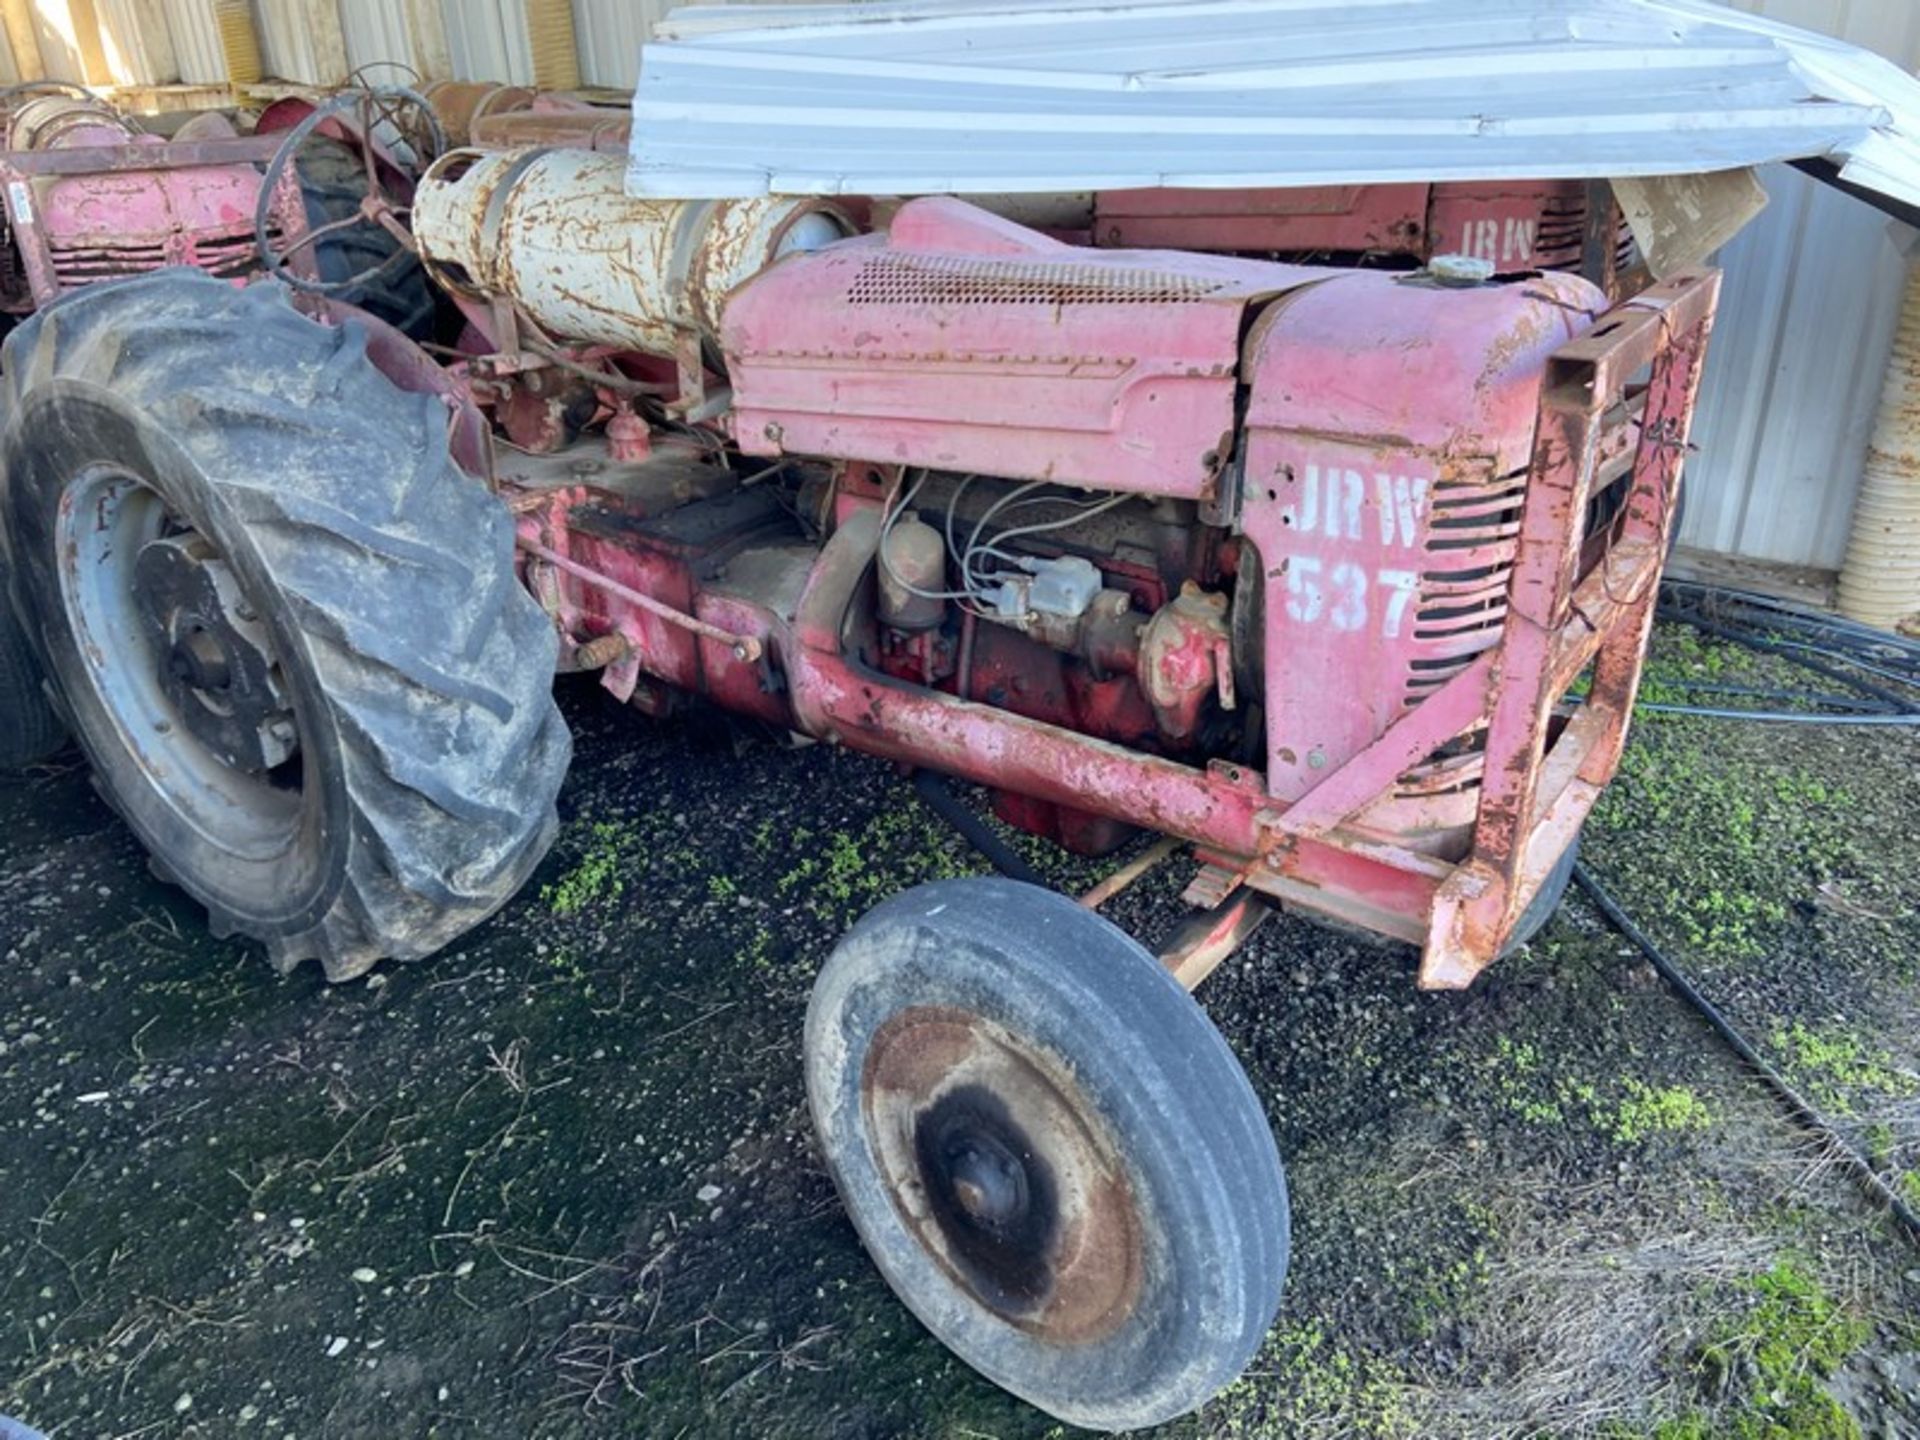 JRW Tractor (Unit 537)(LOCATED IN ATWATER, CA)